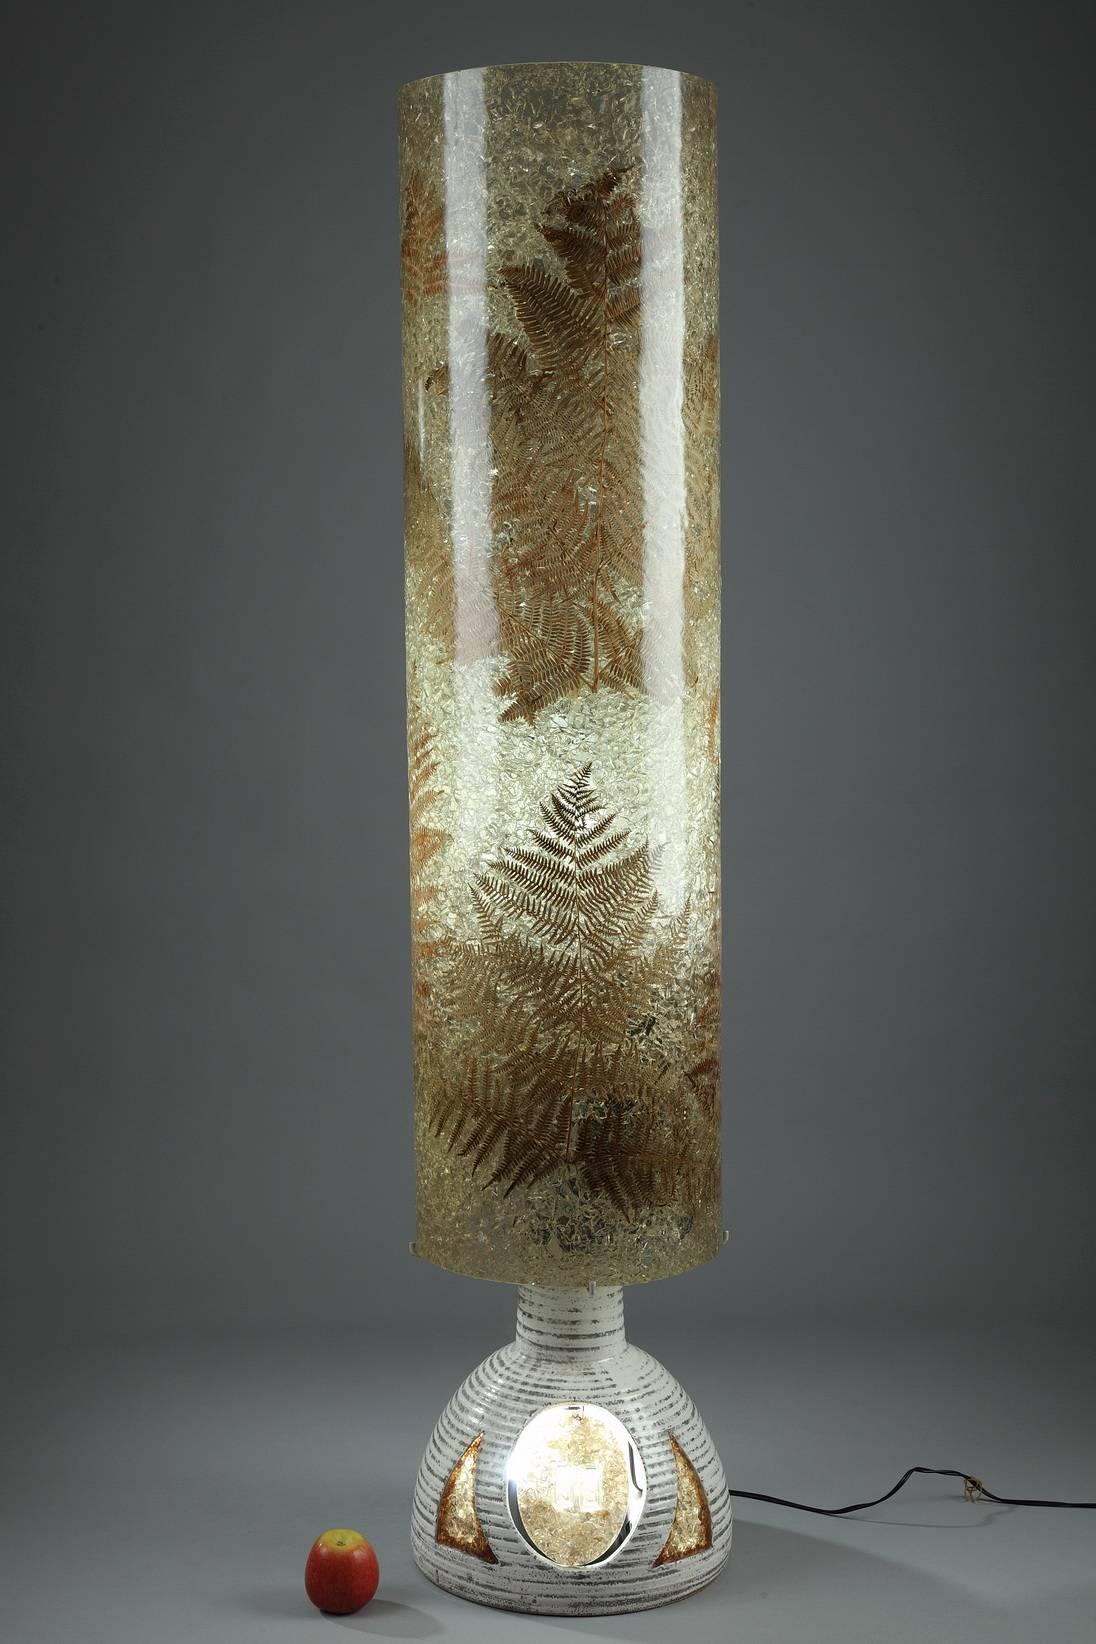 Floor lamp by Les ateliers Accolay made up with a ceramic leg and a shade in resin decorated by ferns. There are two bulbs, one in the shade and the other one in the ceramic leg,

circa 1970.
Dimensions: D 12.2 in, H 57.5 in.
Dimensions: D 31